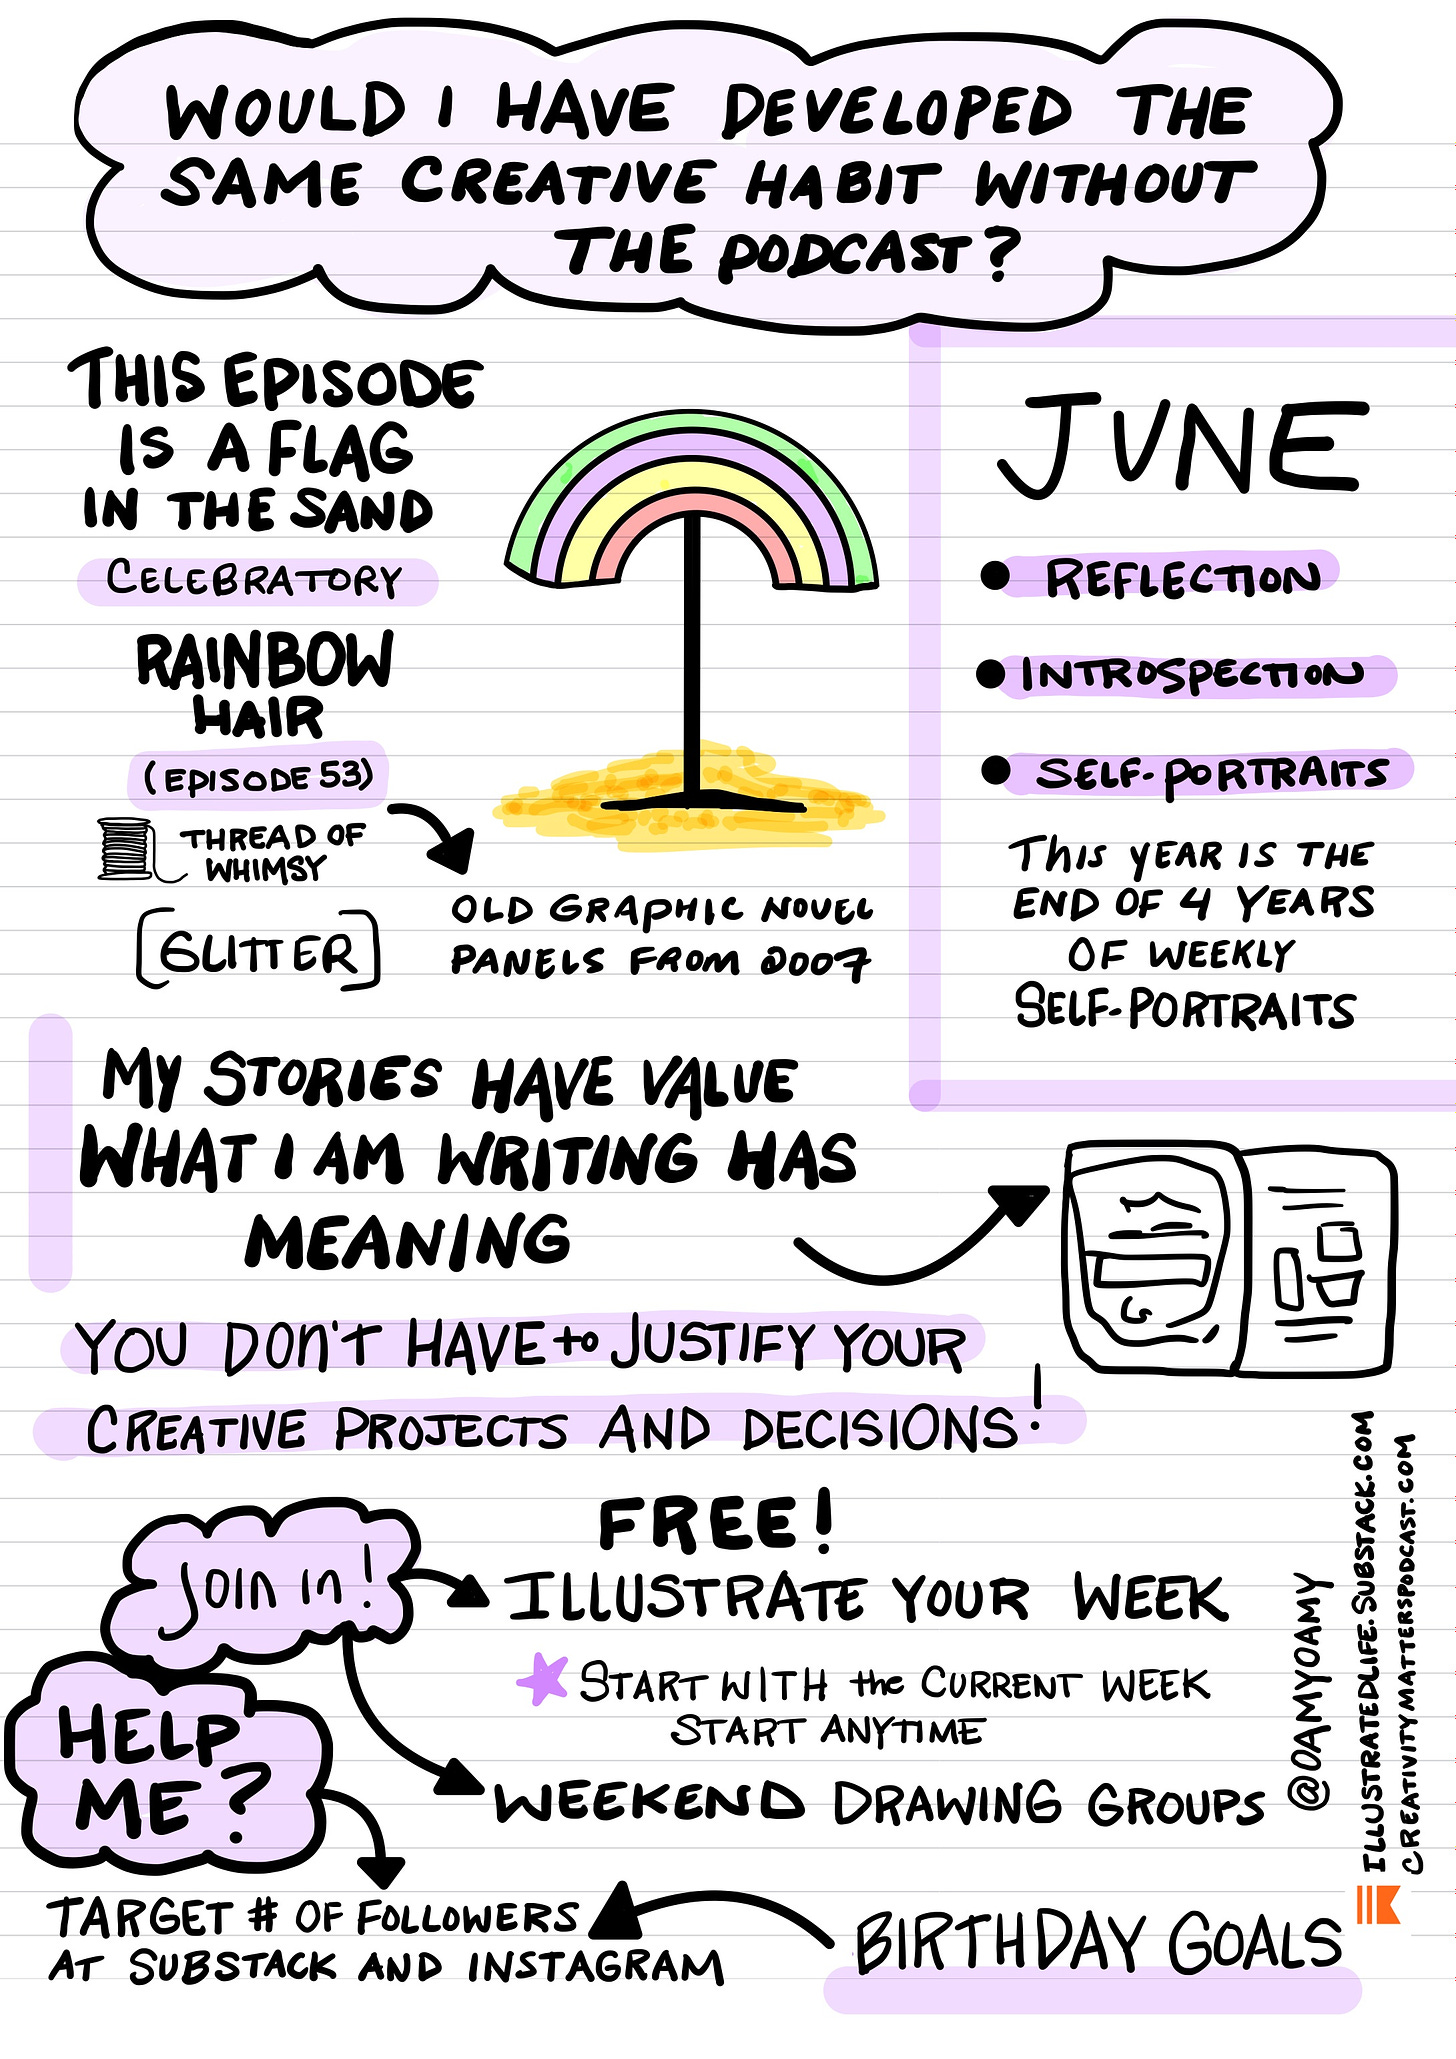 Page 2 of sketchnote of Episode 487 of Creativity Matters Podcast, A Cowen